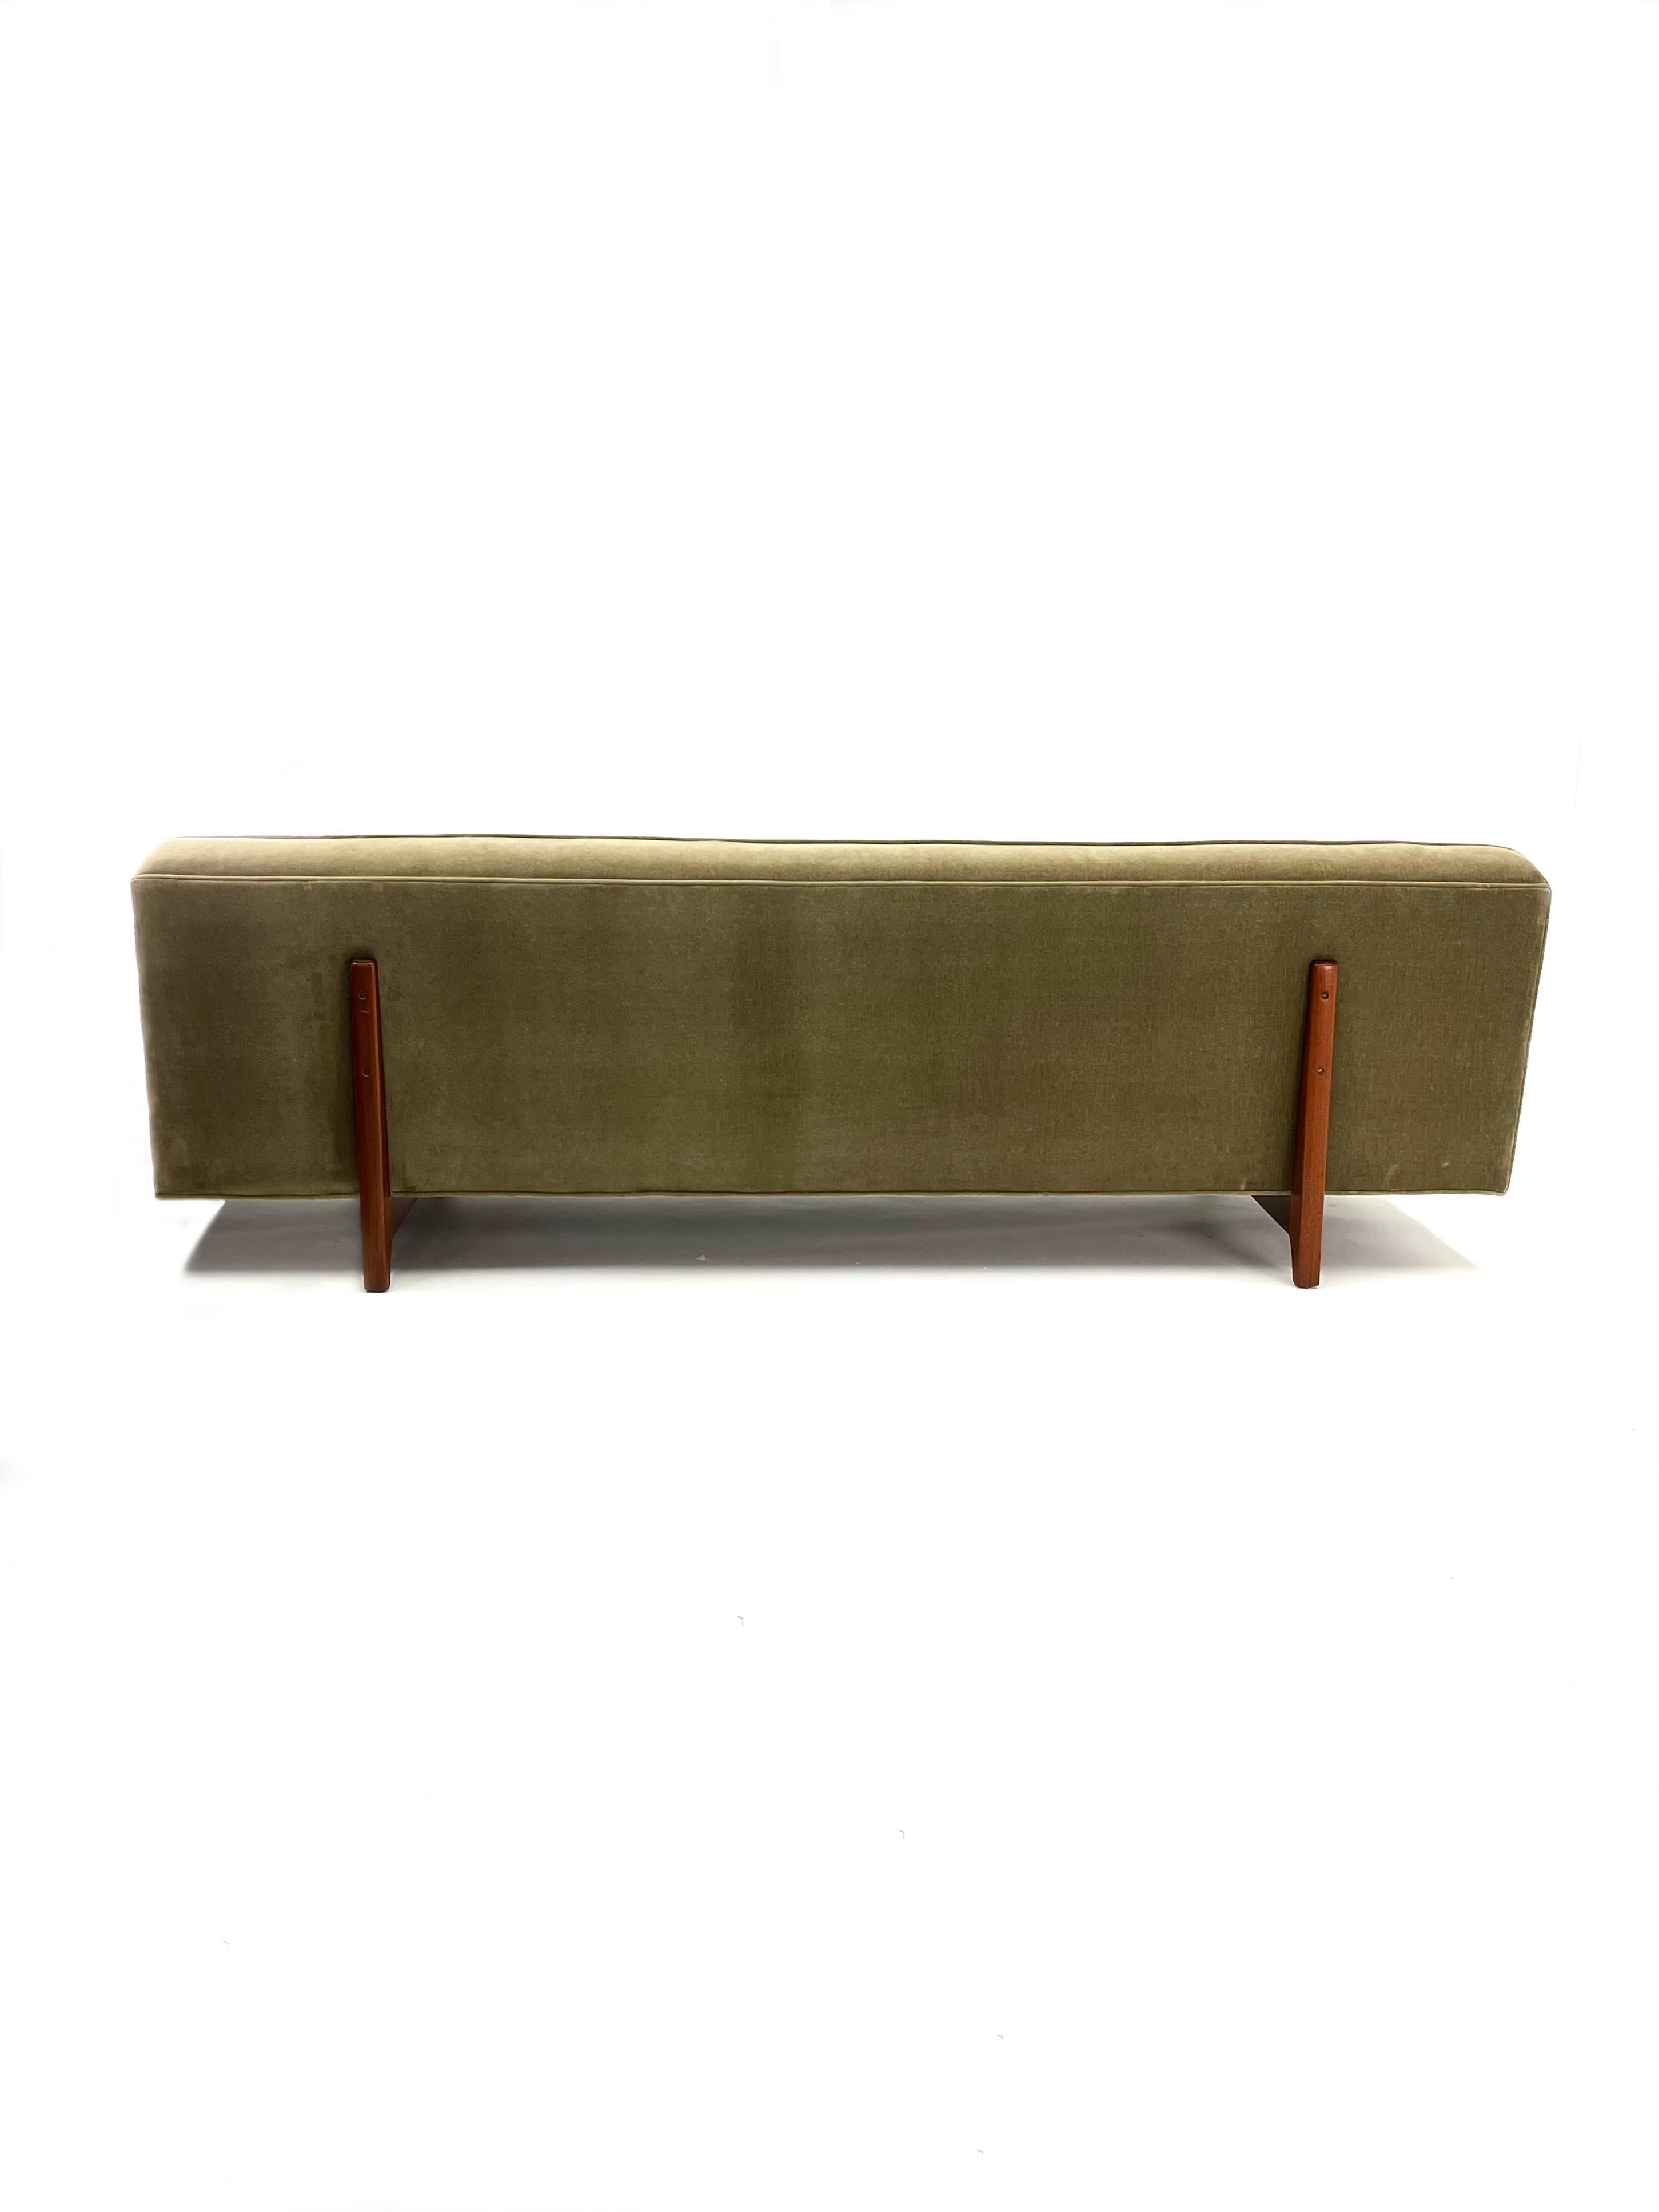 Introducing the newly upholstered and freshly-restored bracket-back three seater sofa by Edward Wormley for Dunbar. This comfy Mid Century Modern sofa features mahogany legs that run from the base and up the back of the sofa giving it an appearance